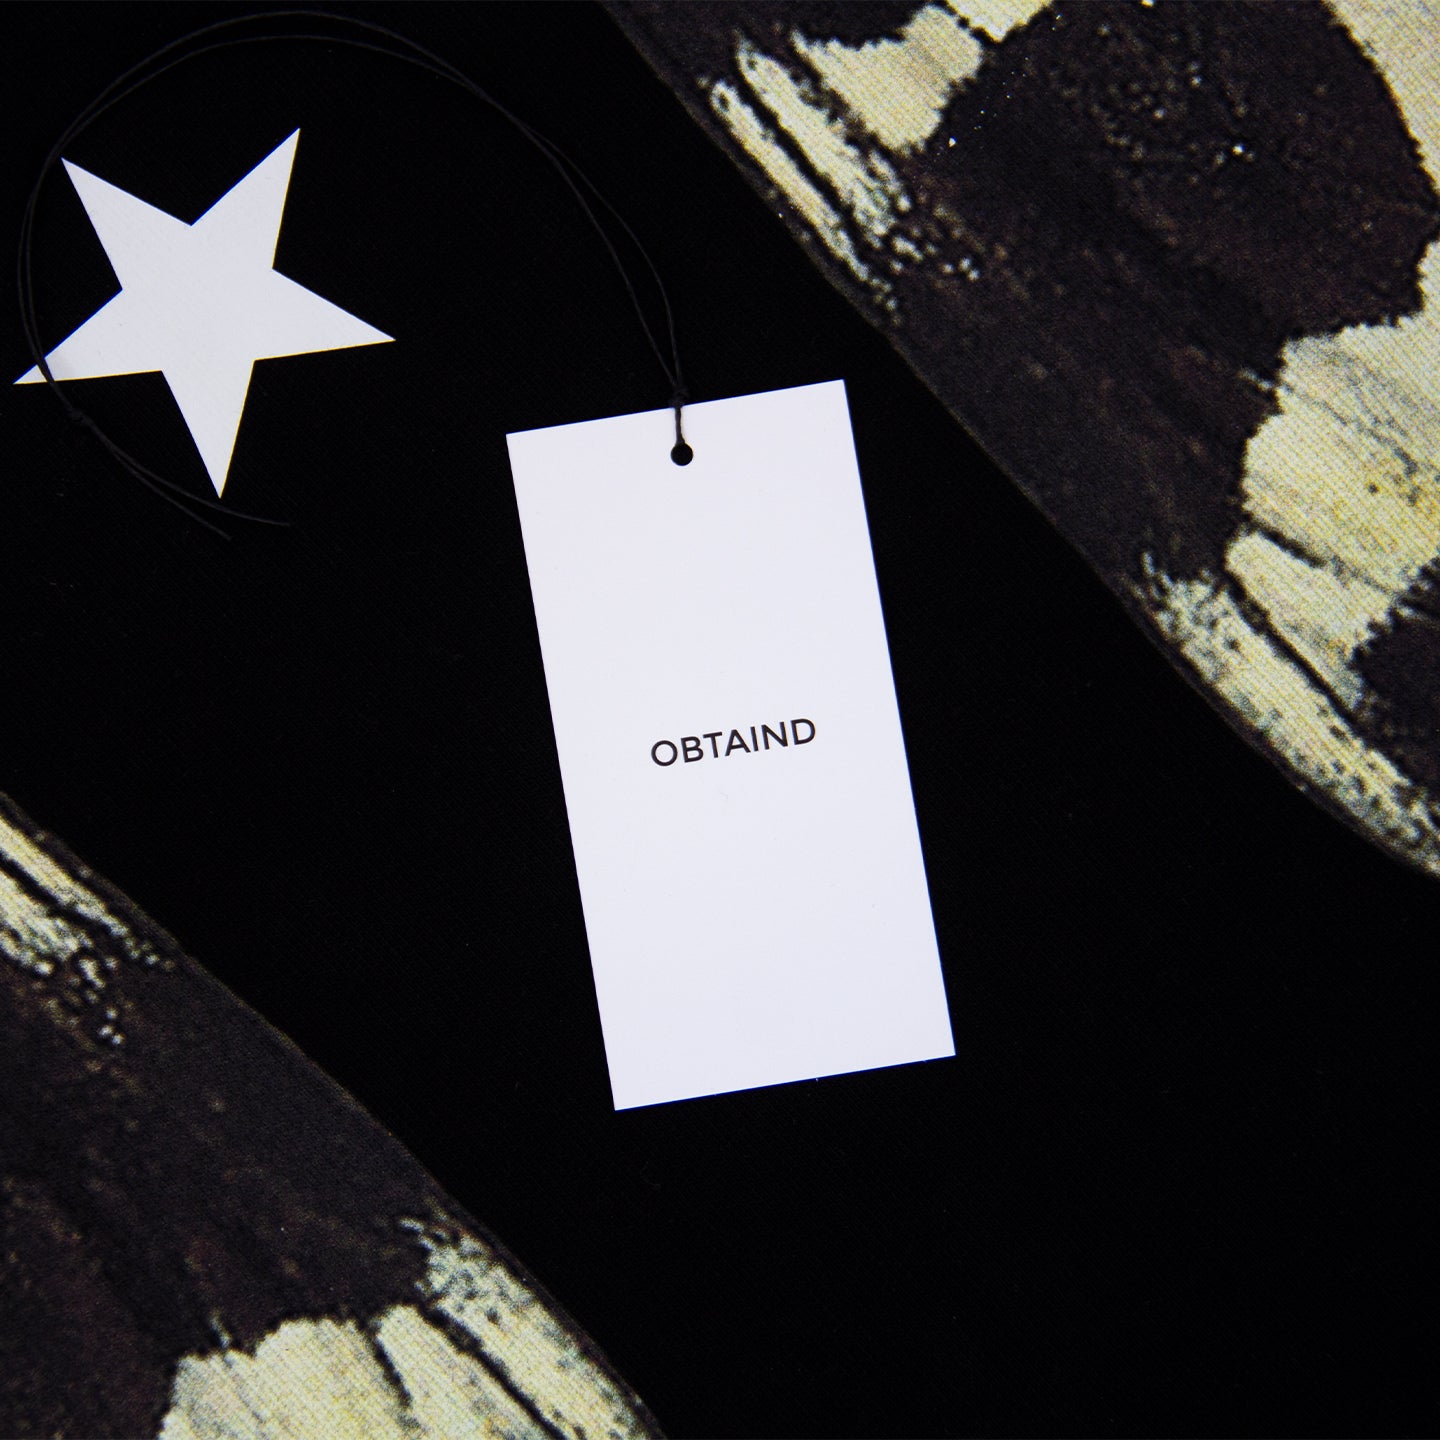 GIVENCHY SS15 BUTTERFLY STARS CREWNECK